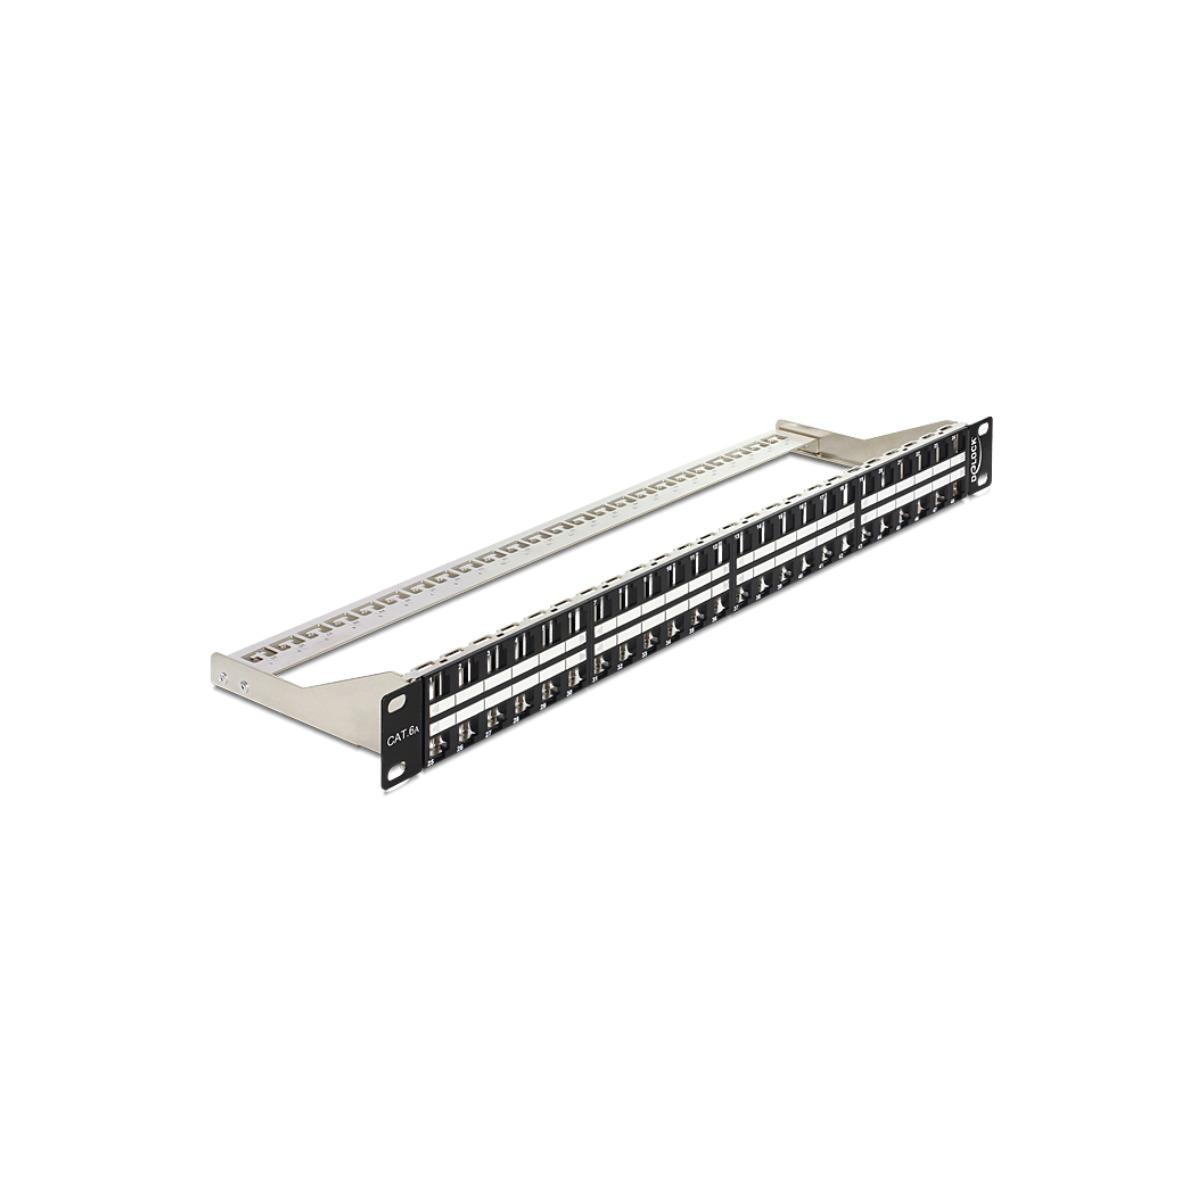 DELOCK 43280 Patchpanel